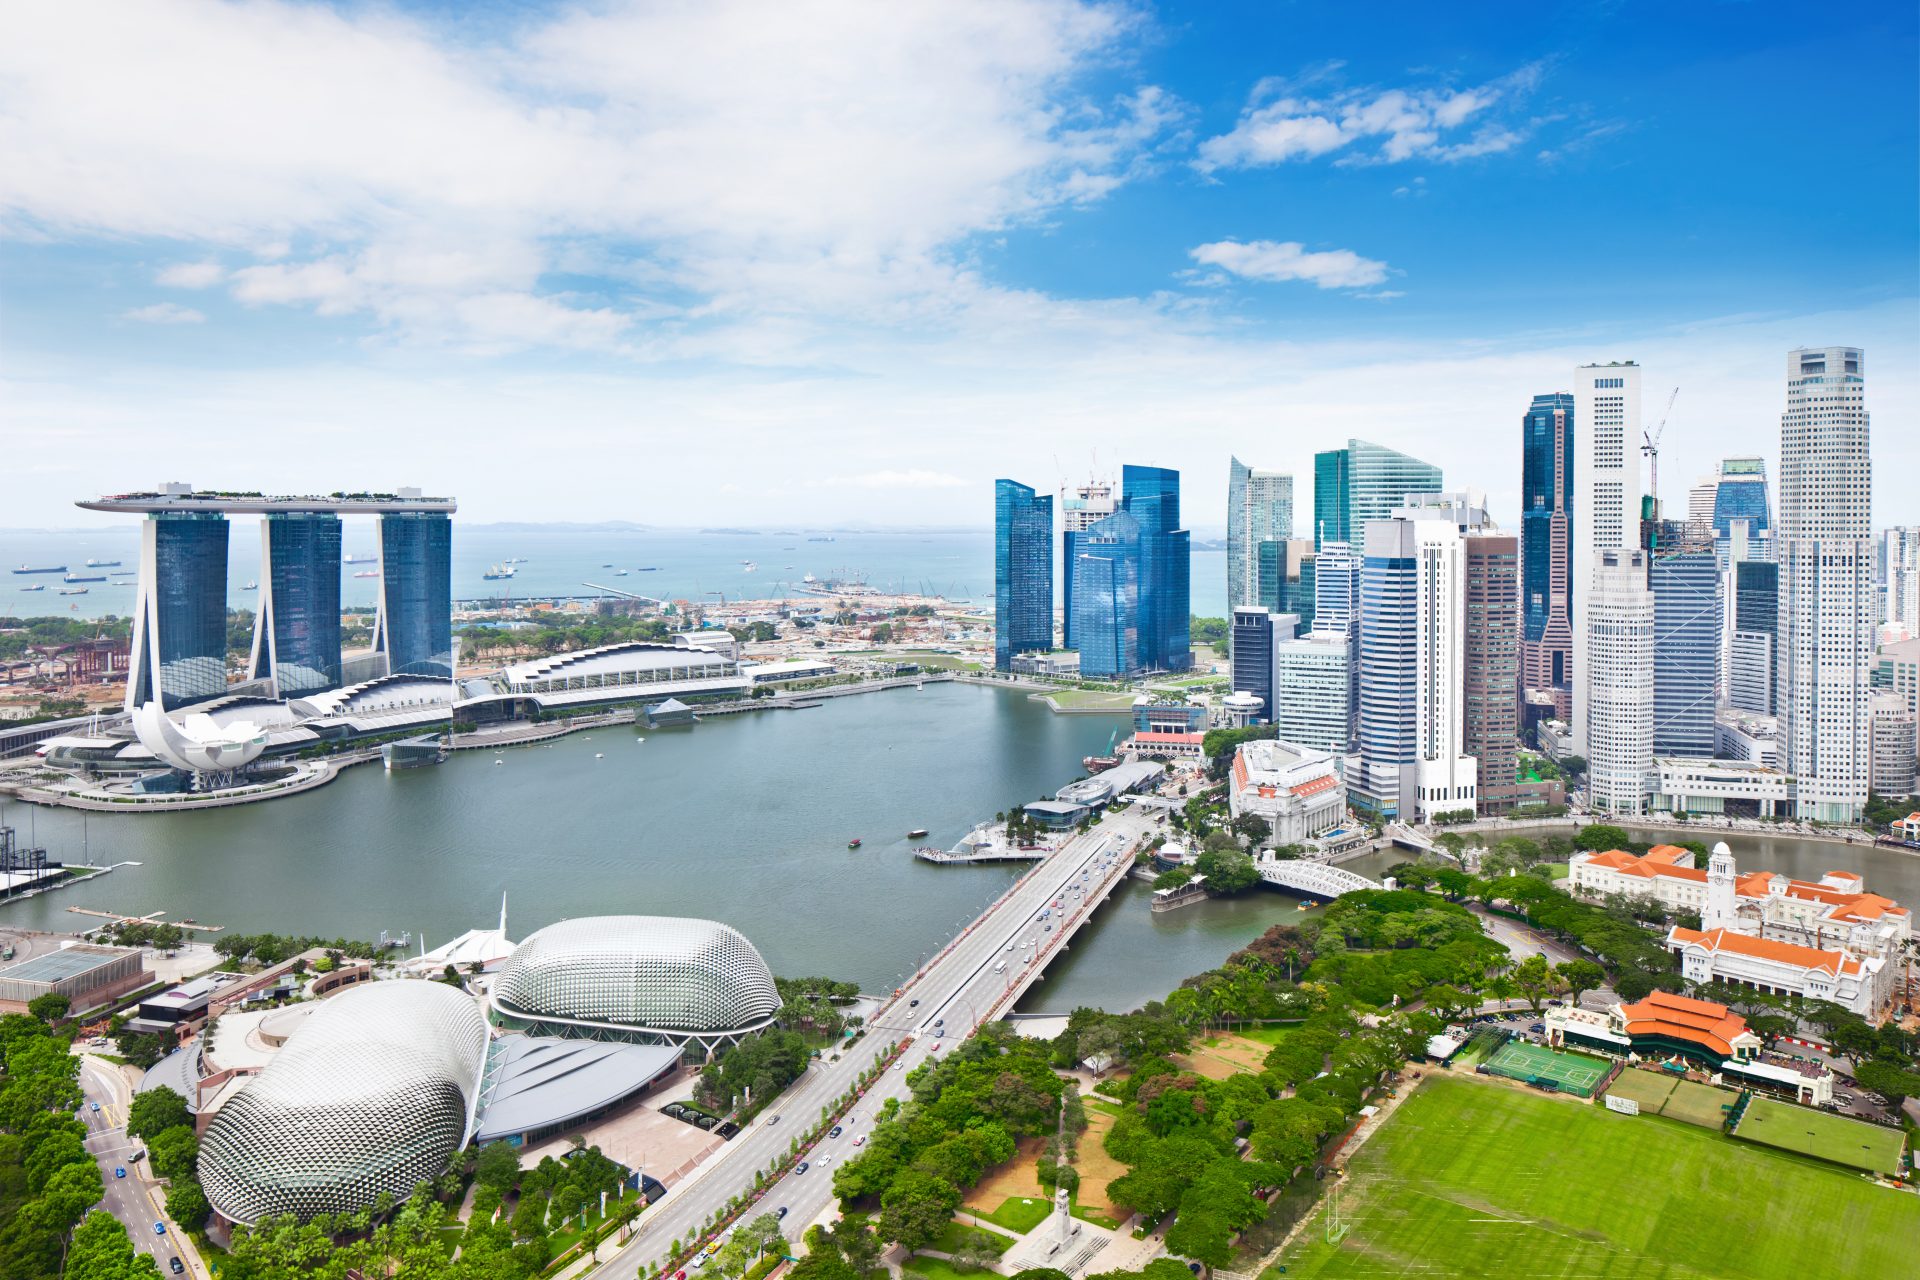 The pictures shows the harbour area of Singapore.